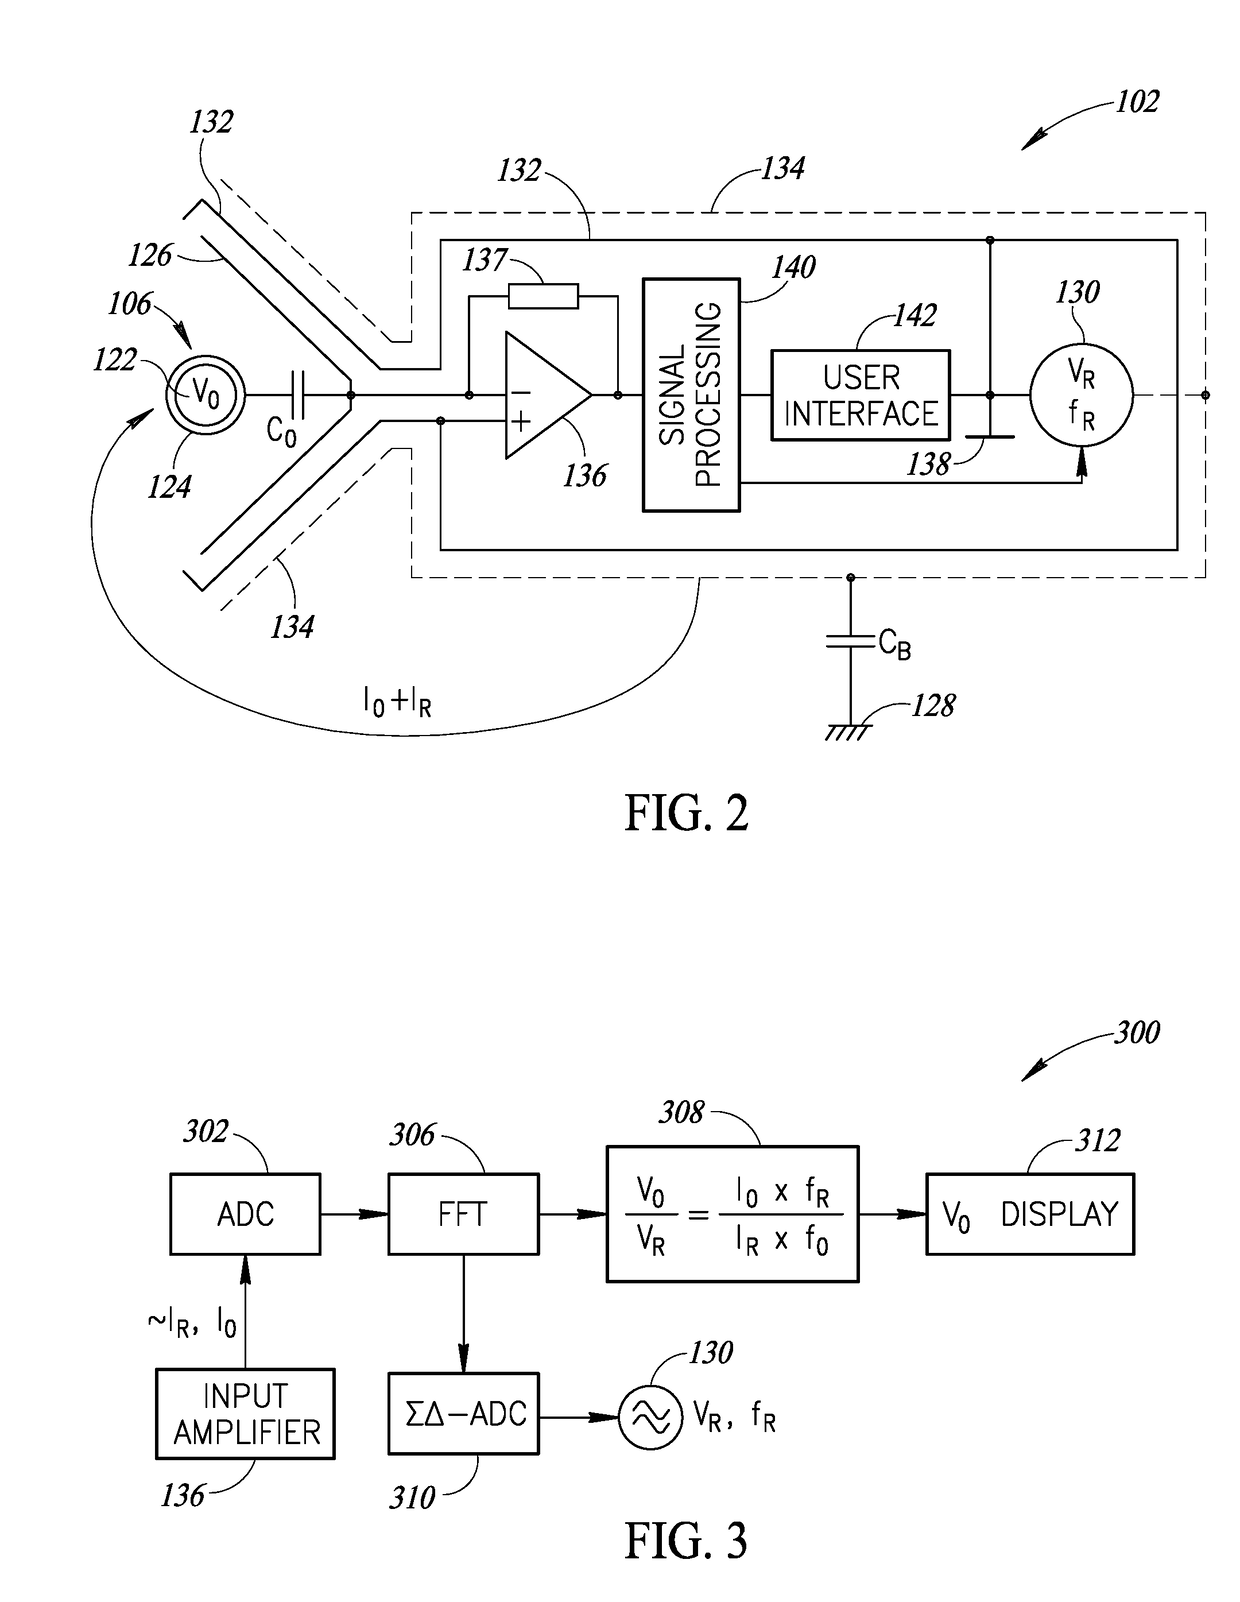 Non-contact electrical parameter measurement systems